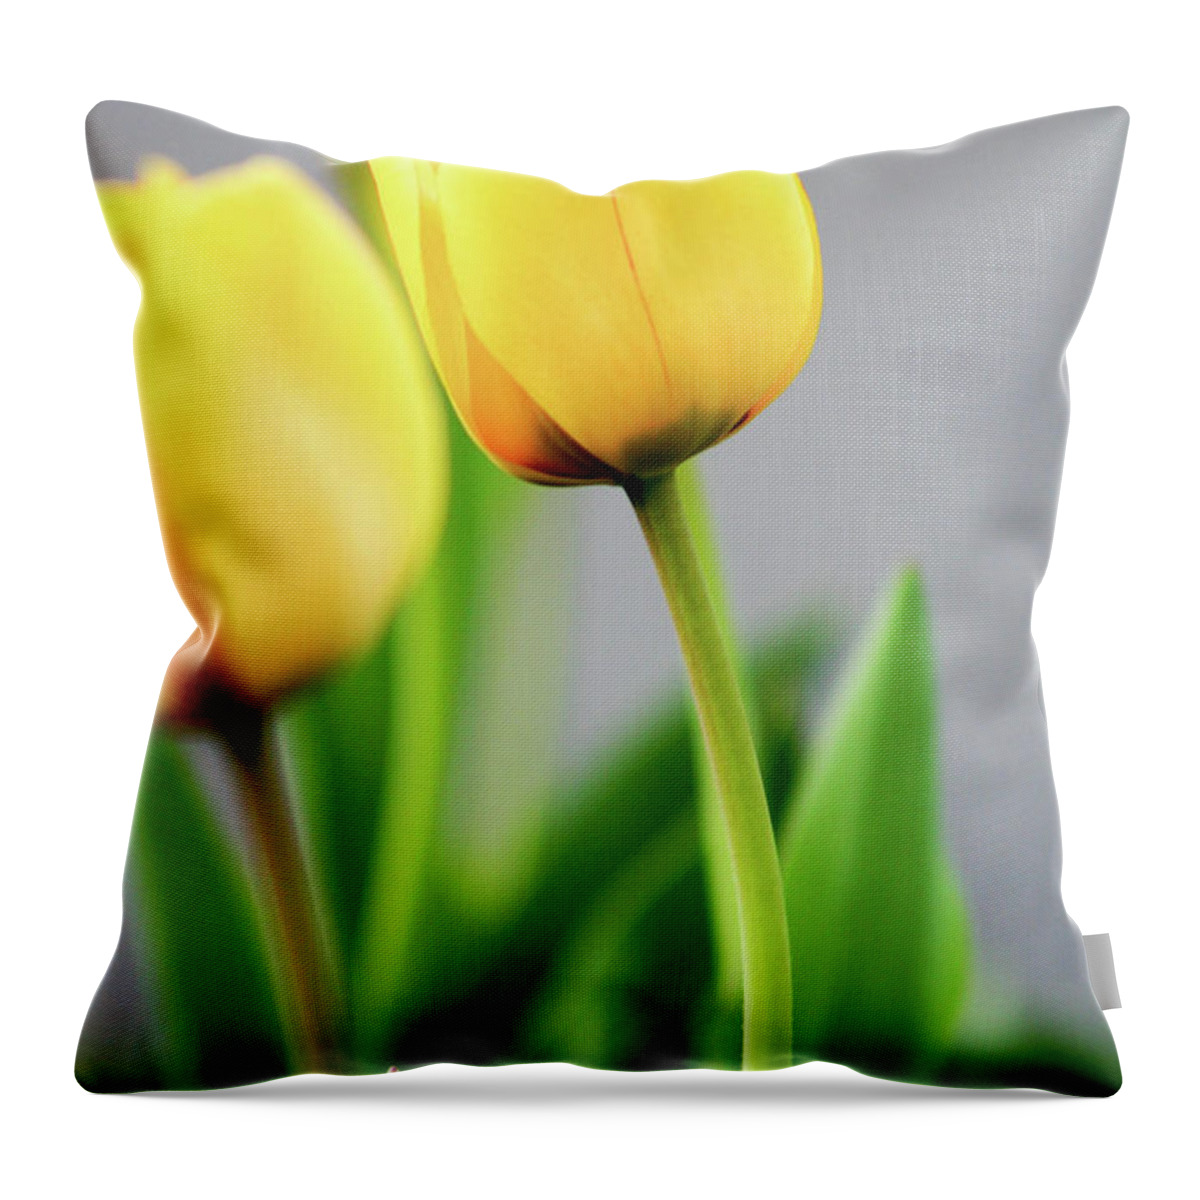 Floral Throw Pillow featuring the photograph Yellow Tulips by Mary Anne Delgado